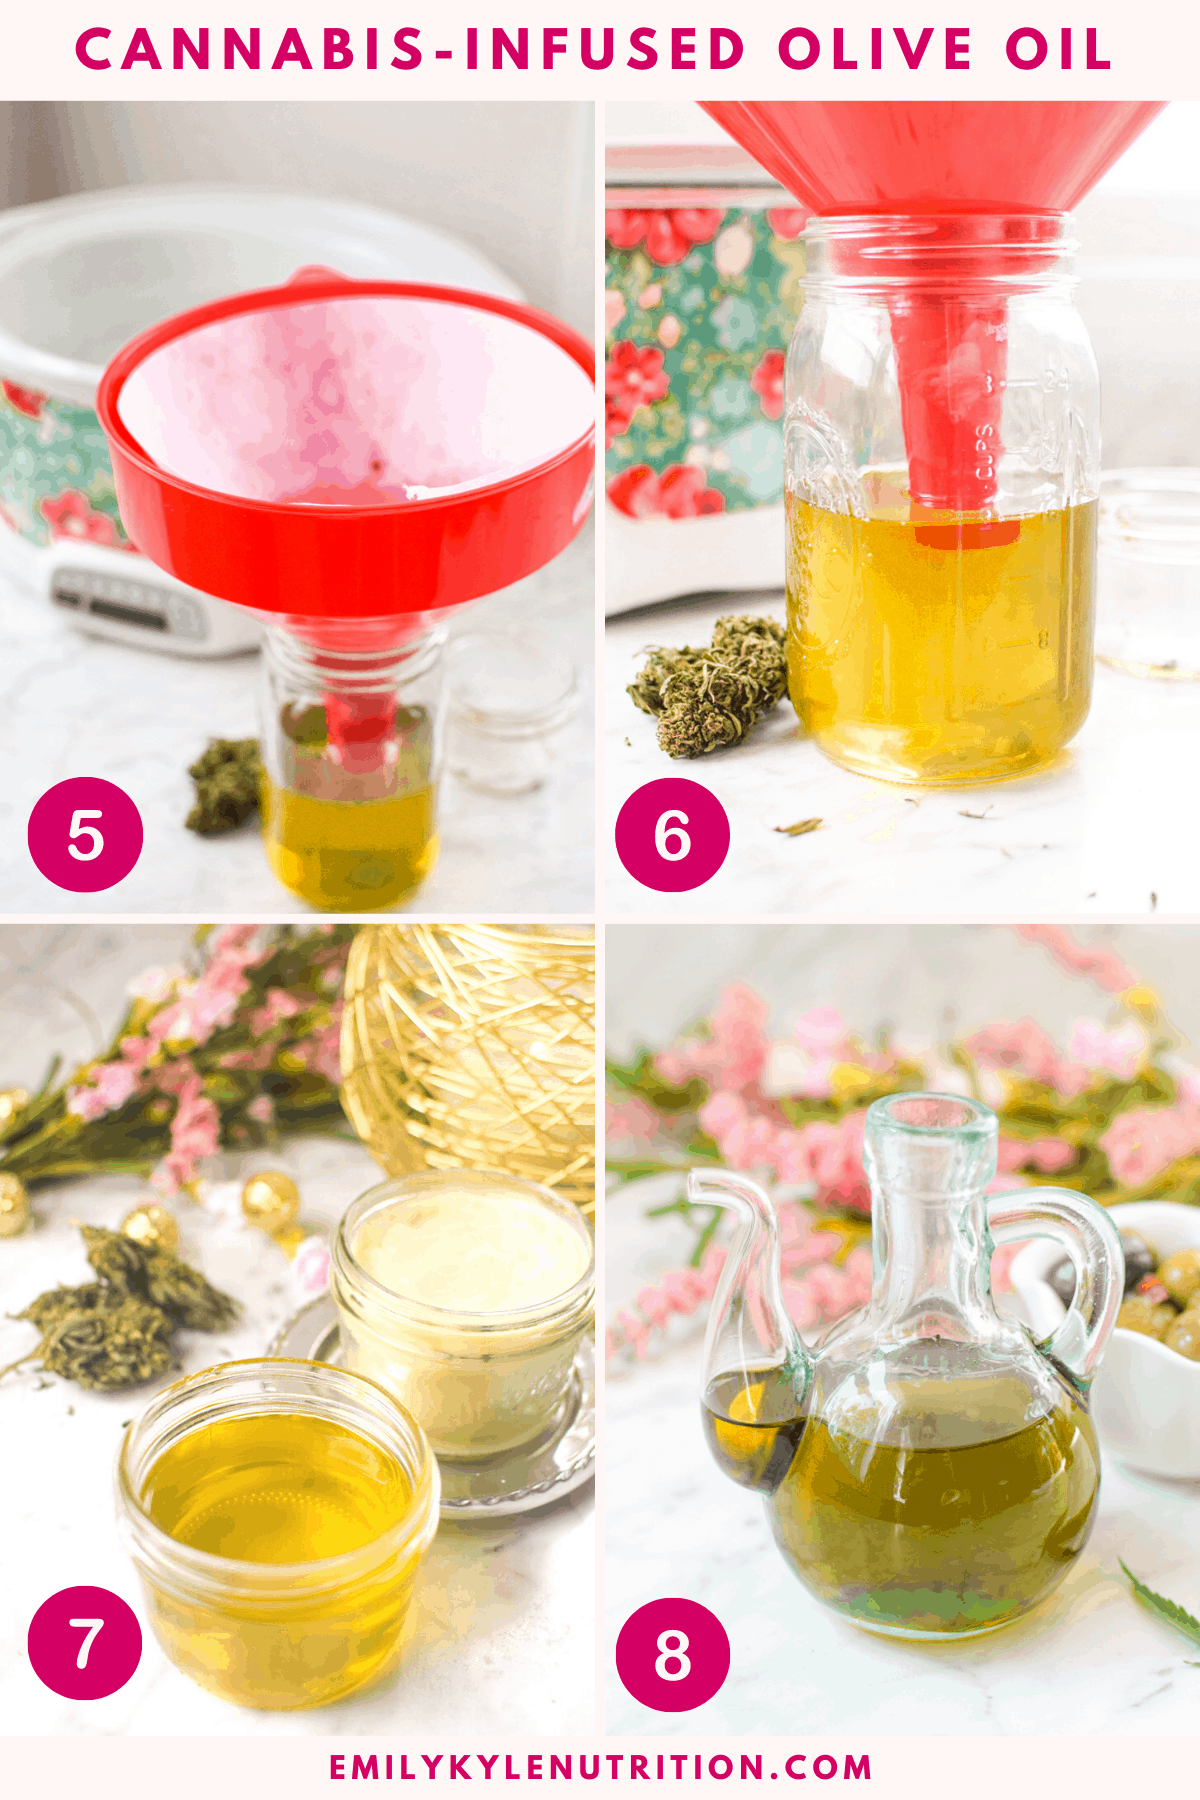 A 4 step collage showing a jar of oil for straining, the strained oil with a funnel in it, a final product shot of liquid olive oil